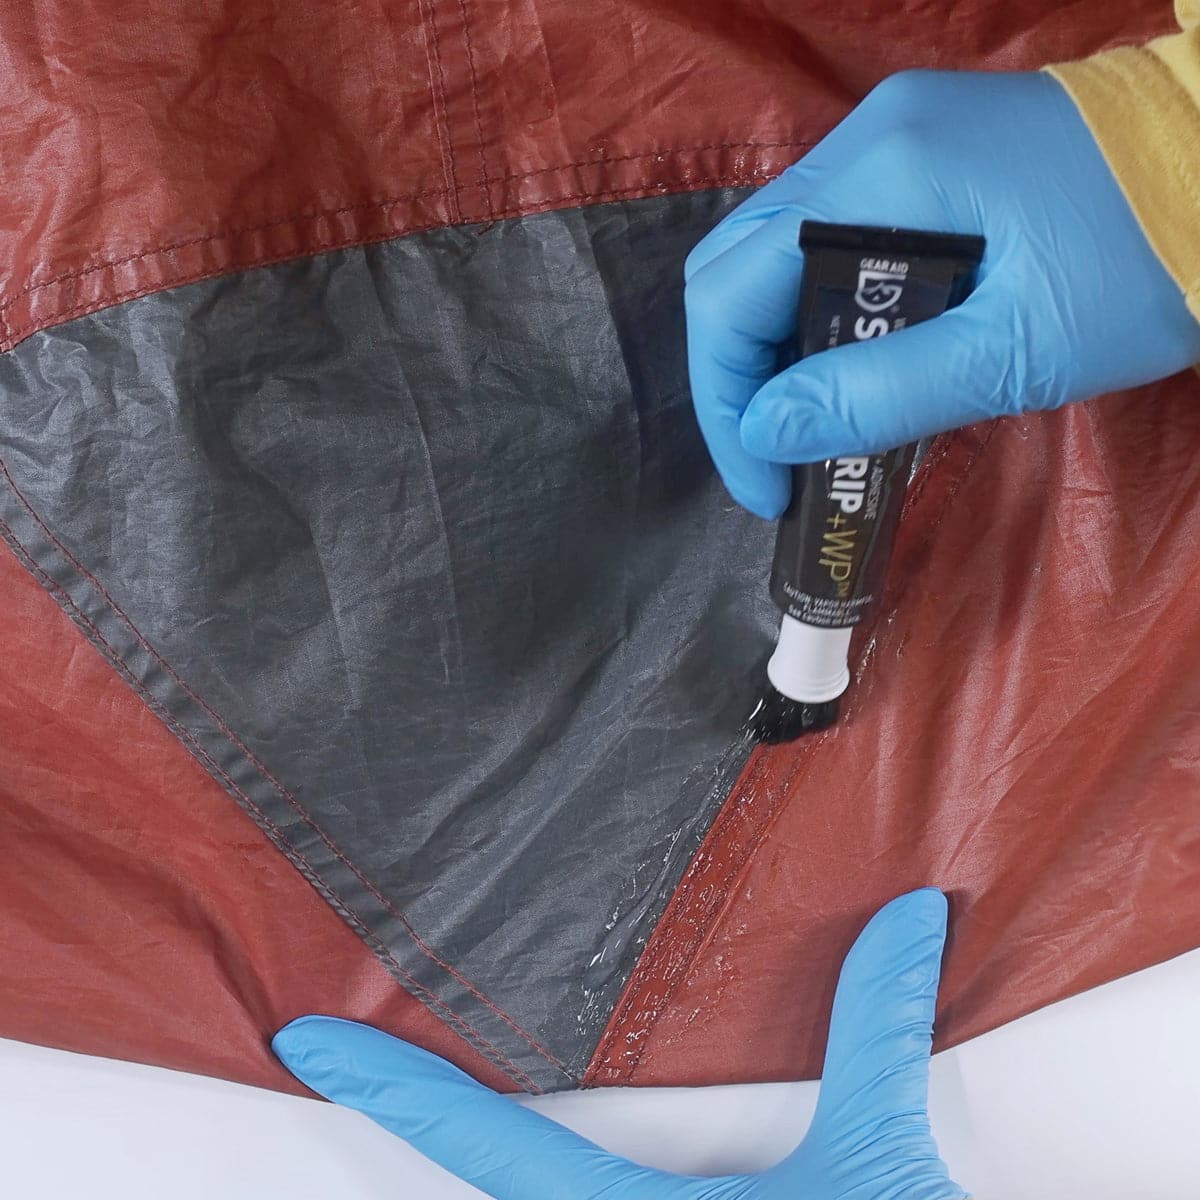 Featuring the Seam Grip+WP 1oz adhesive, glue, river wing repair, seam repair, sup care, sup repair, tent repair manufactured by Gear Aid shown here from a third angle.